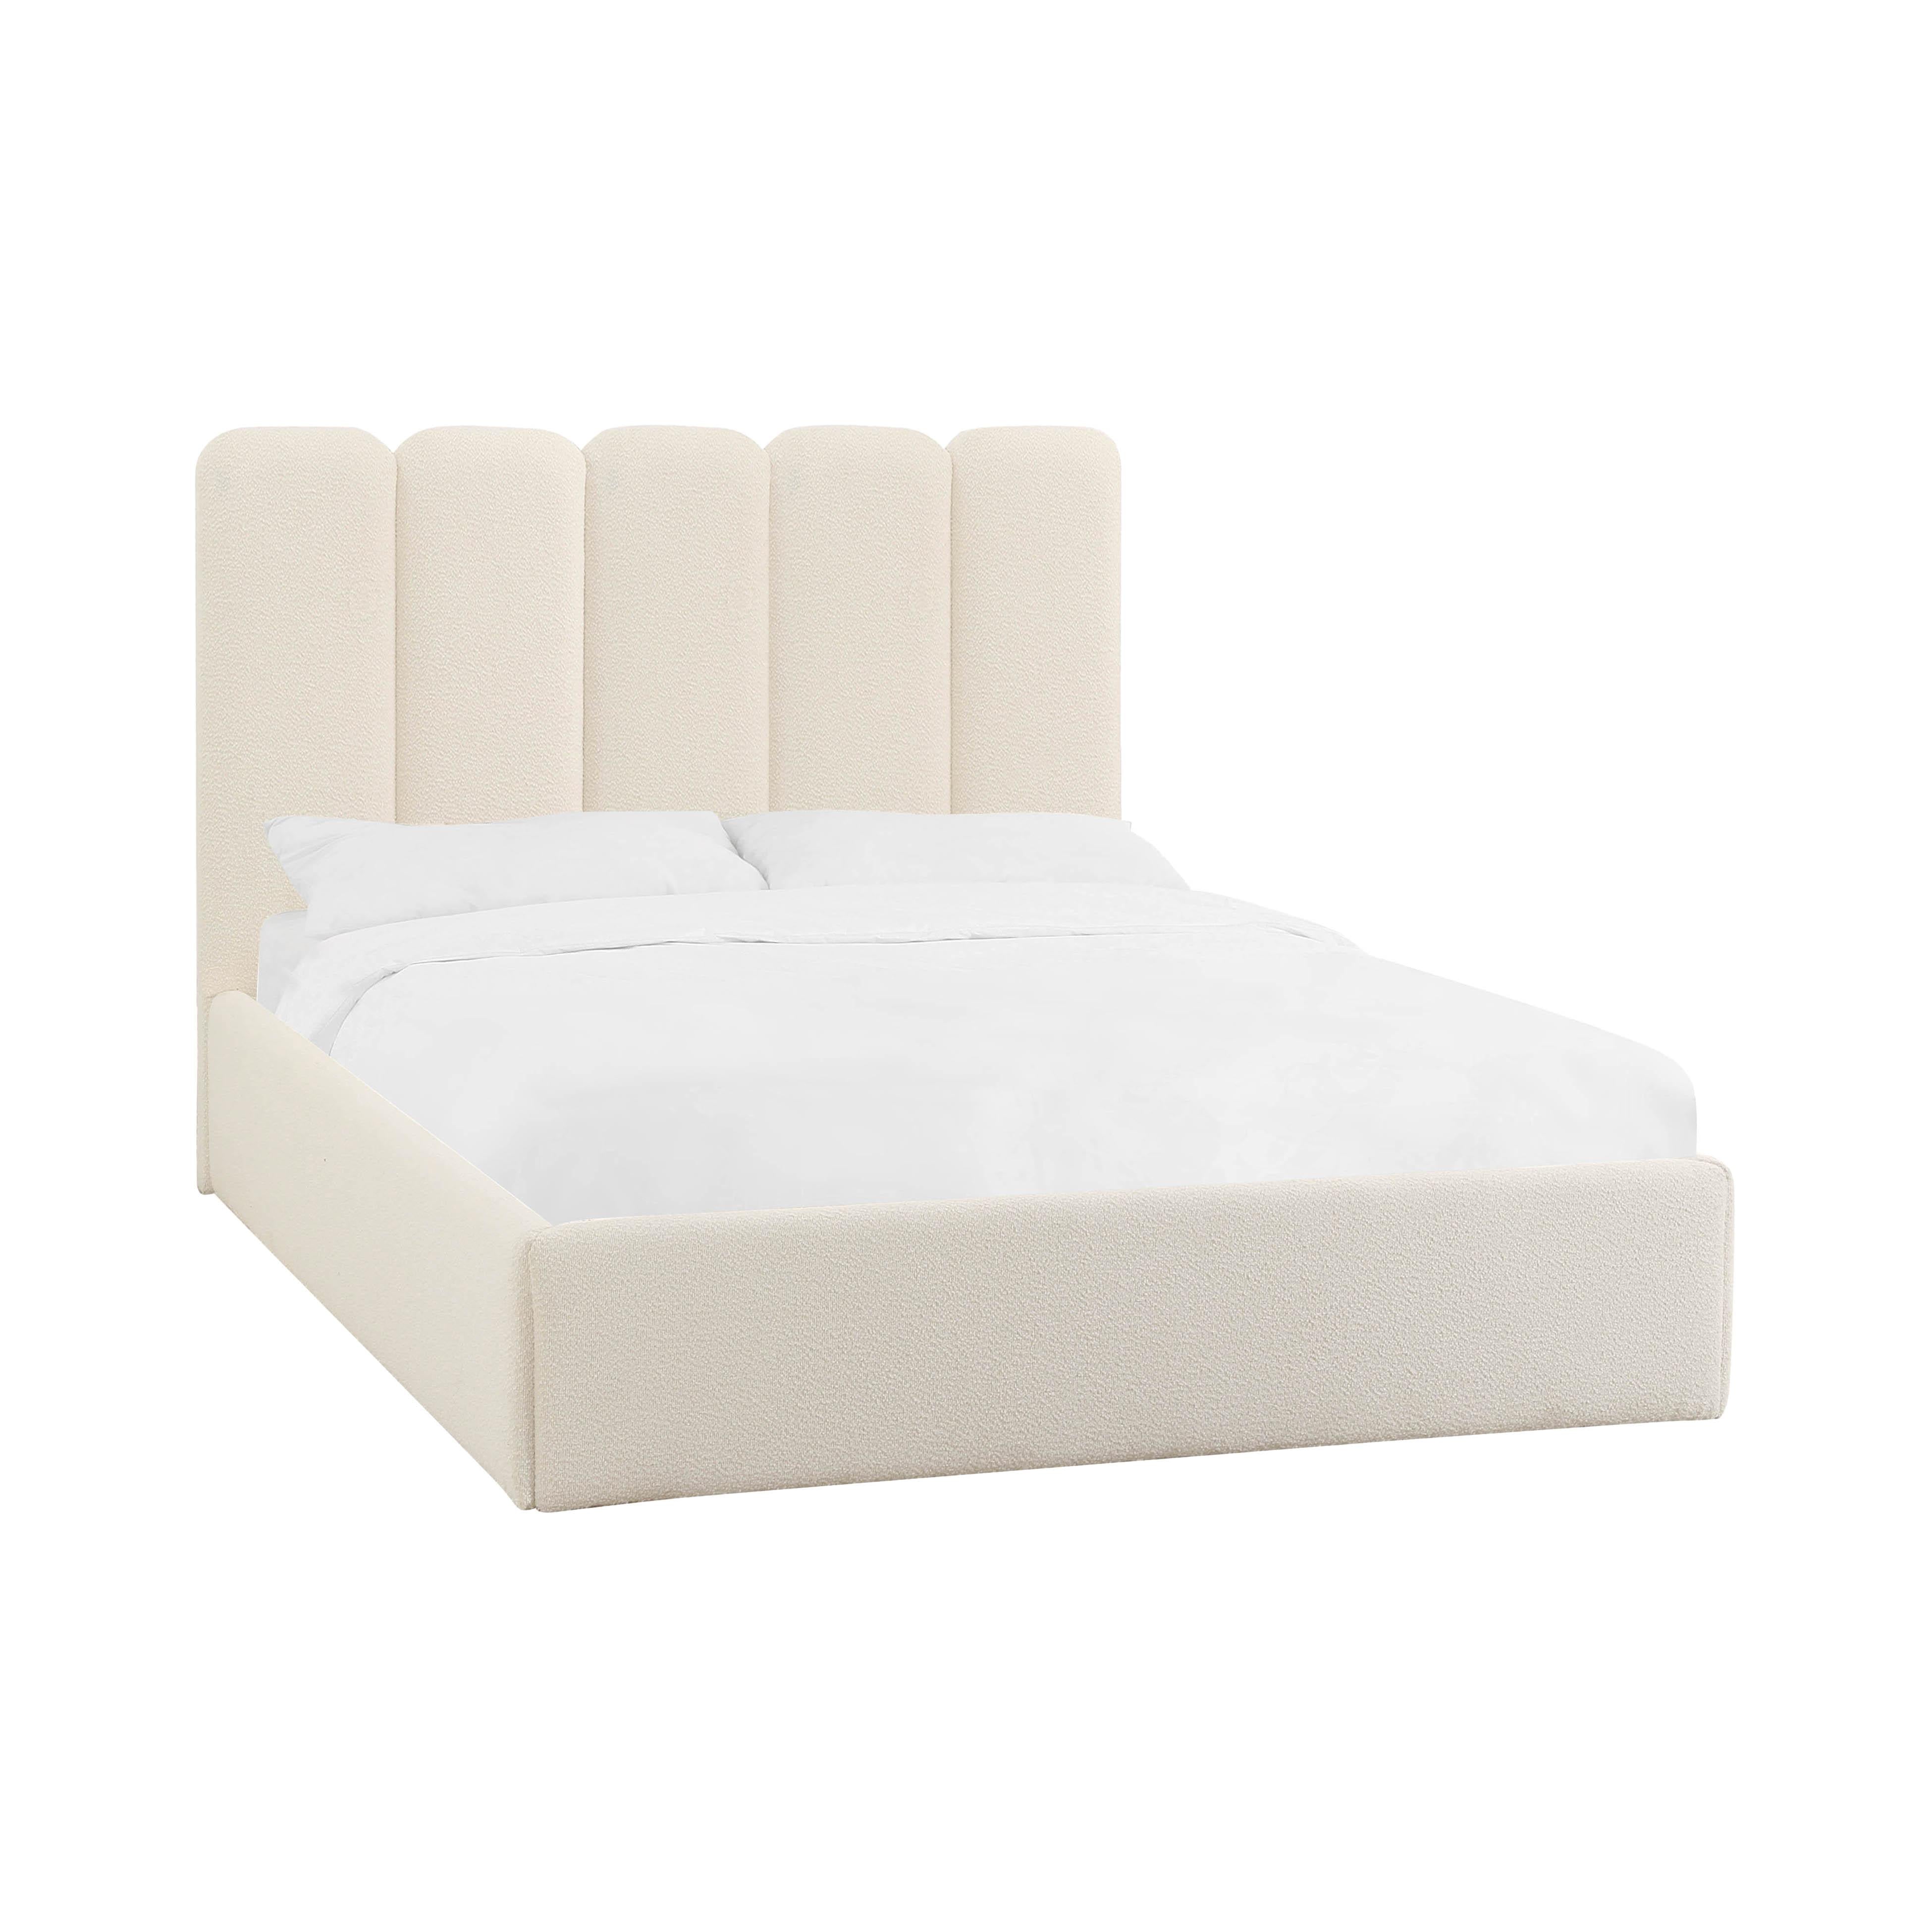 Tov Furniture Beds - Palani Cream Boucle King Bed